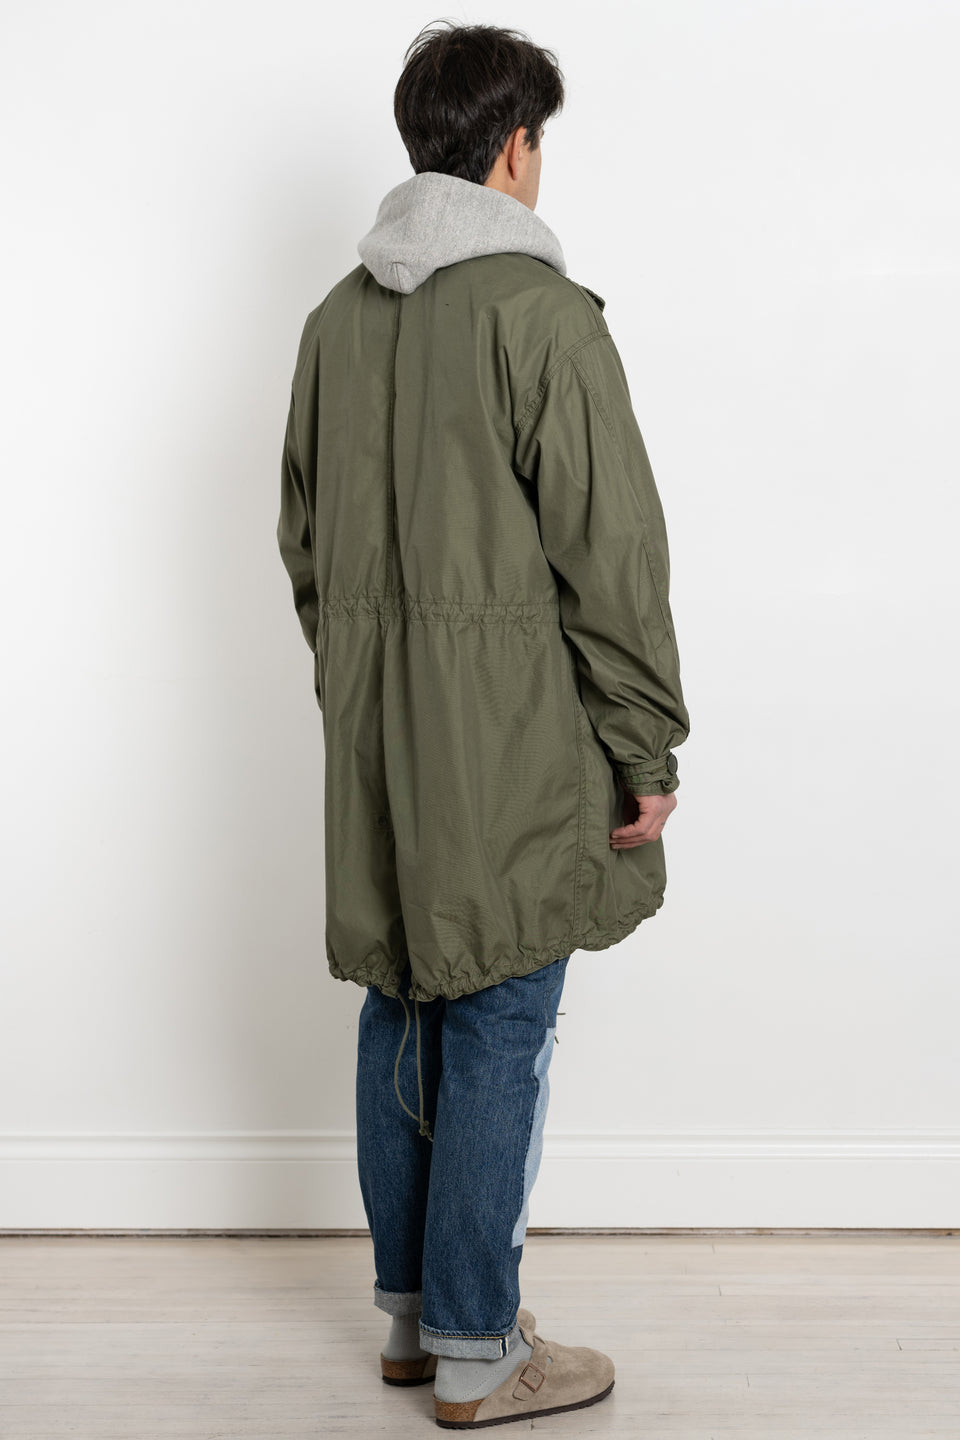 orSlow Japan 23AW FW23 Men's Collection M-65 Fish Tail Coat Army Green Calculus Victoria BC Canada